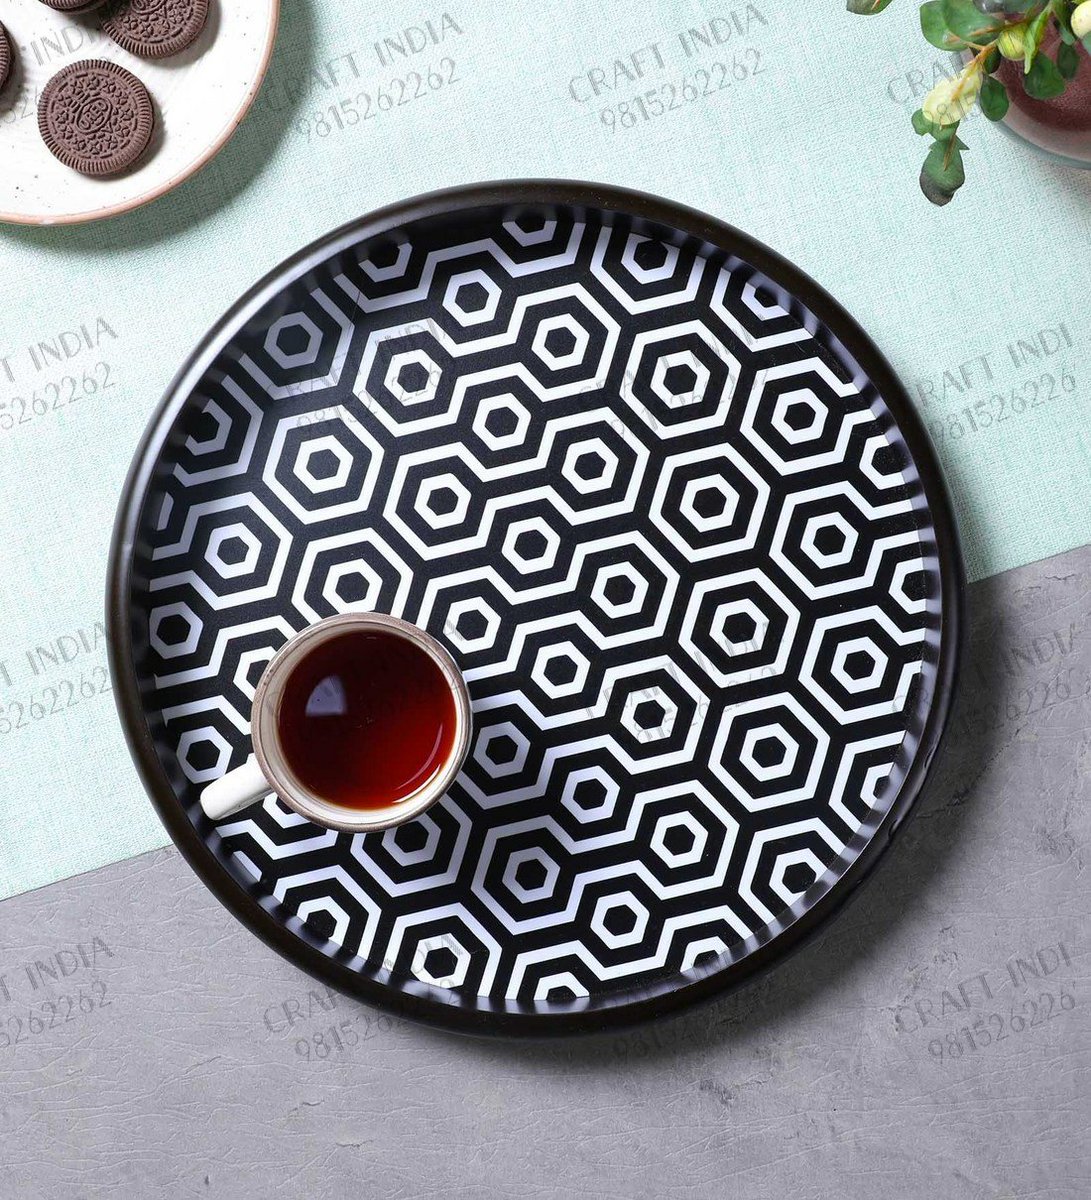 Beautiful printed hand-made collection
MDF Round Tray 
Available in various designs
.
#mdftray #roundtray #handmade #serveware #giftware